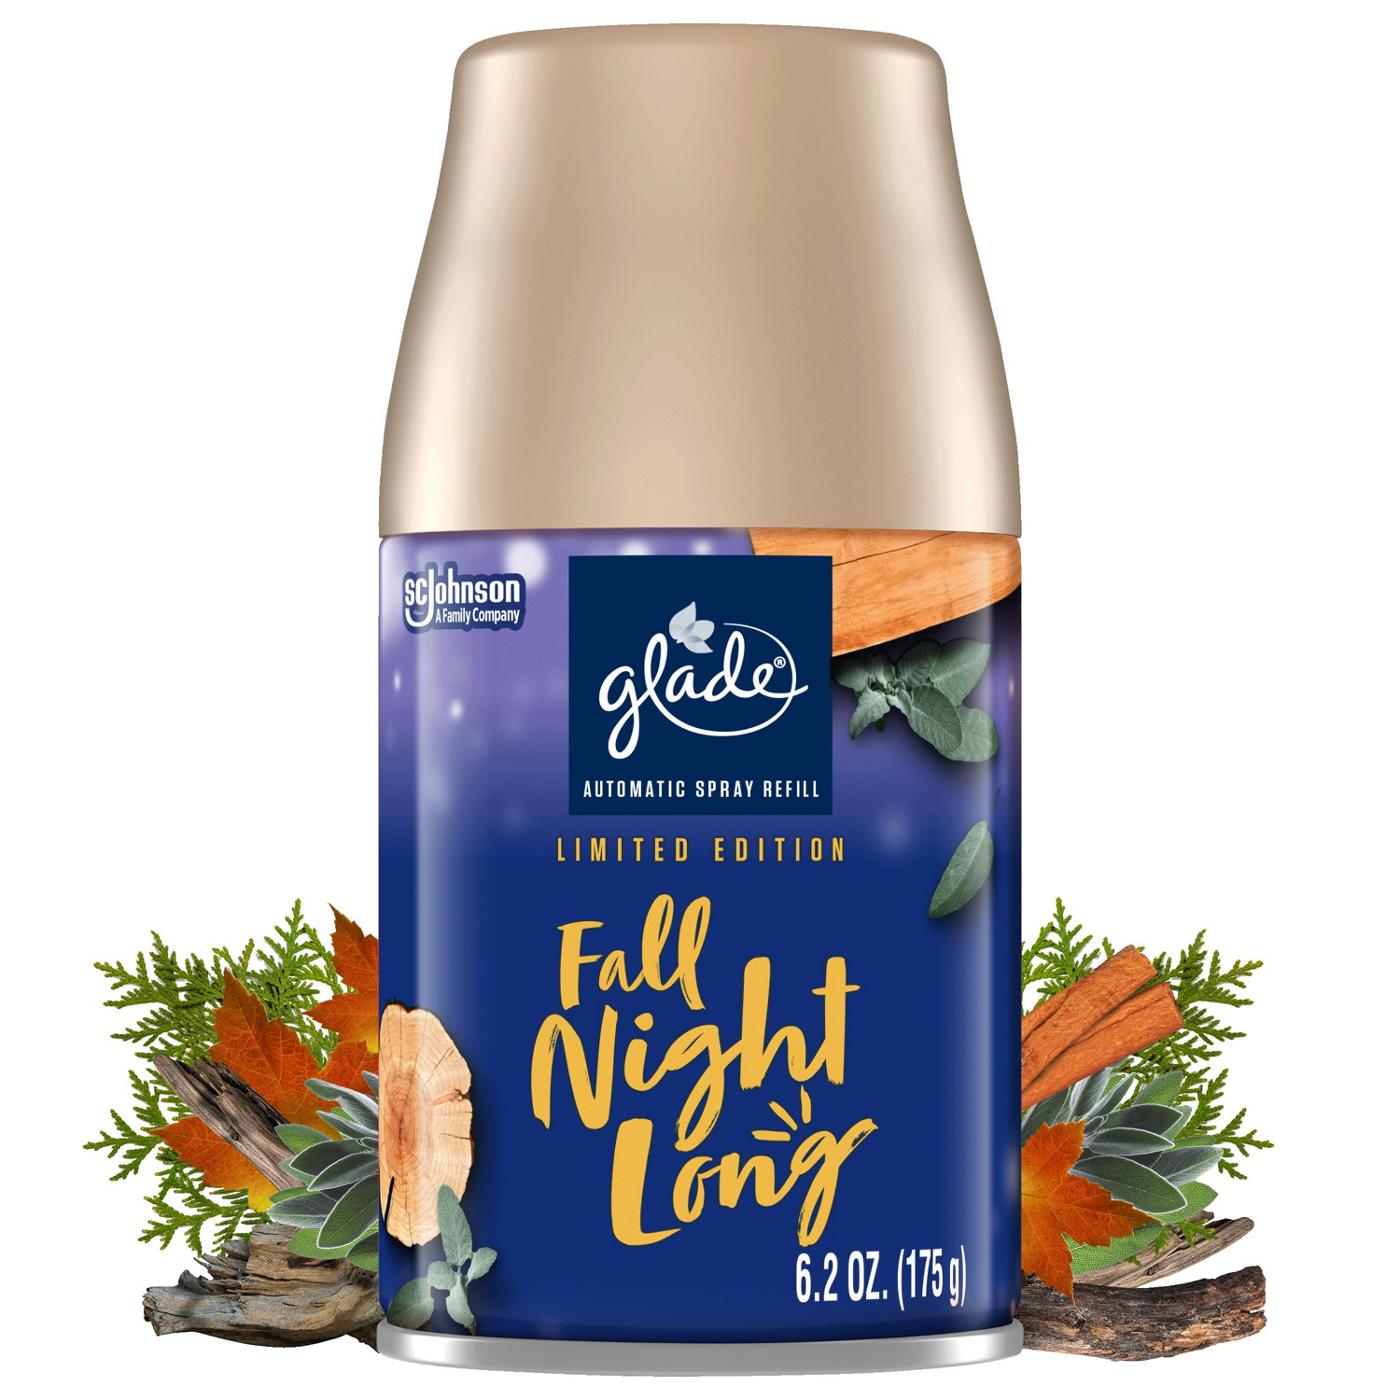 Glade Automatic Spray Refill - Fall Night Long; image 1 of 2